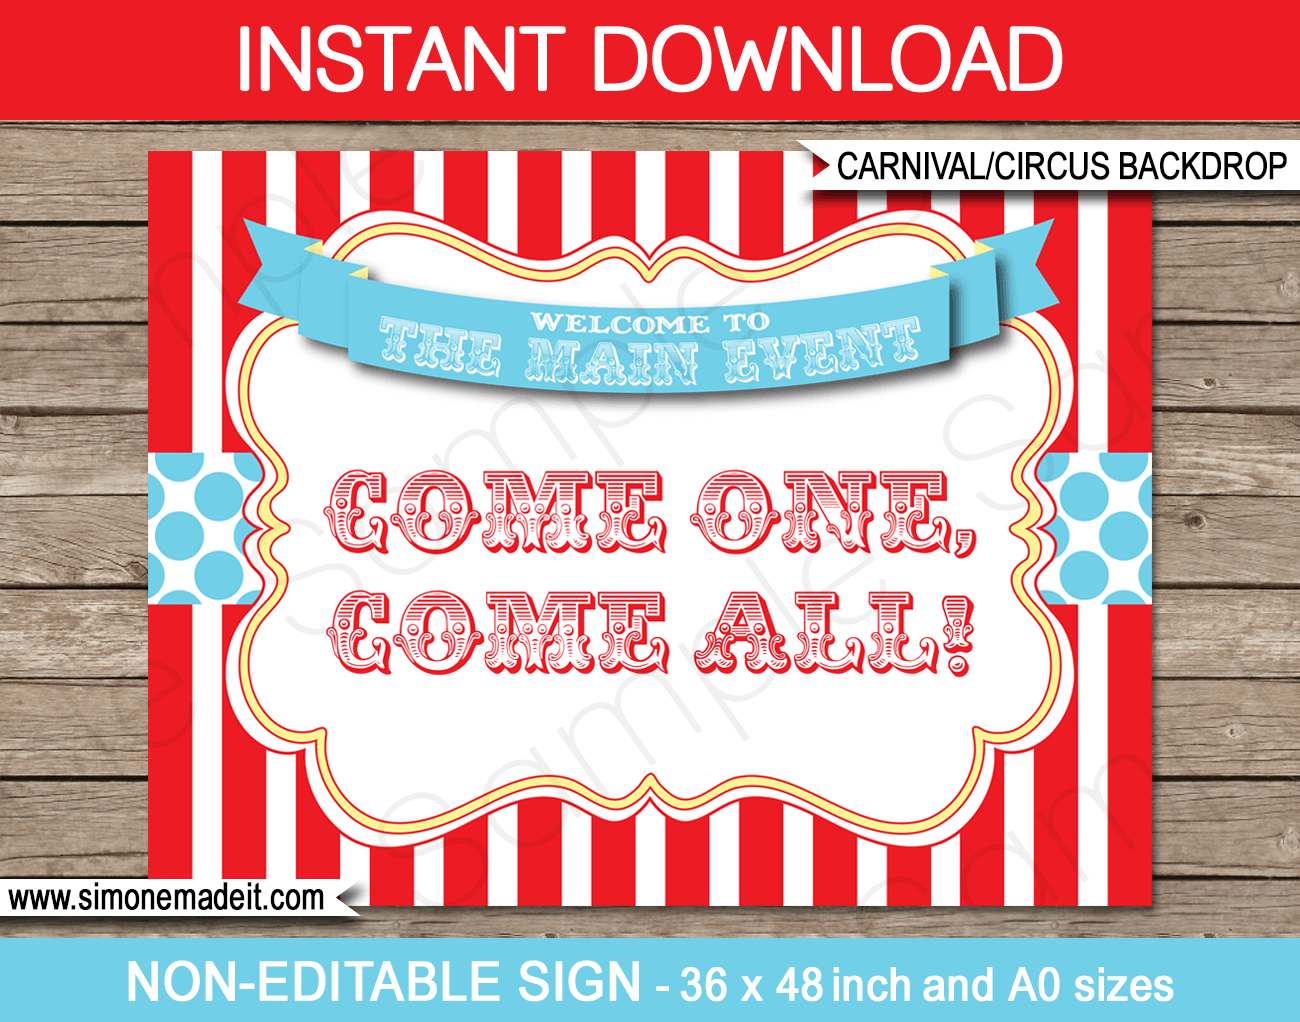 Printable Circus Party Backdrop Sign | Come One Come All | Carnival Party | Red Aqua Decorations | DIY Template | INSTANT DOWNLOAD via simonemadeit.com